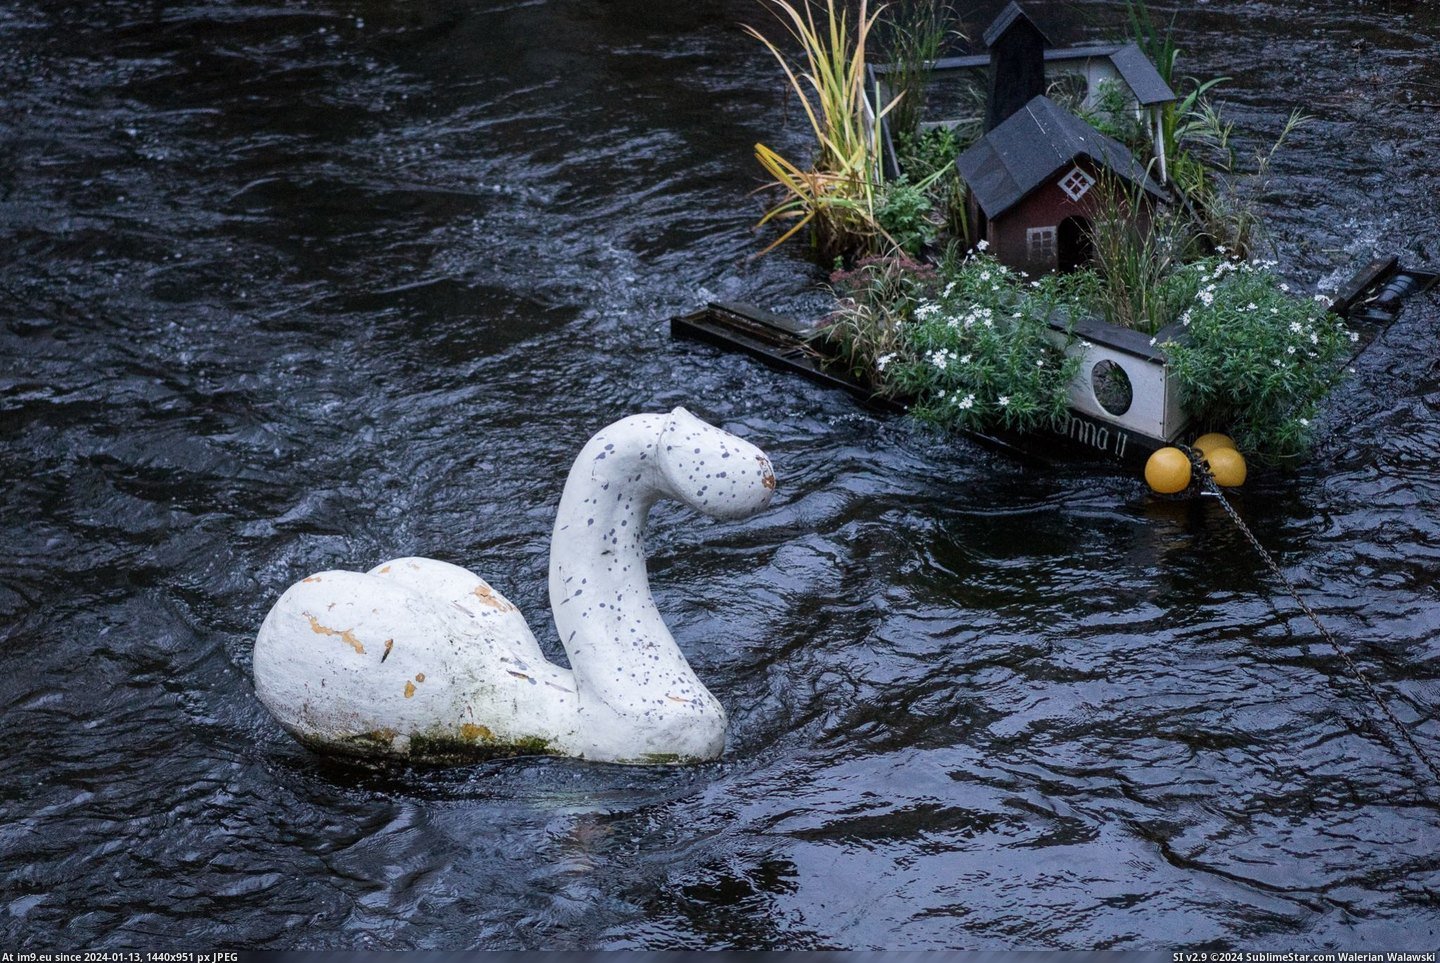 #Wtf #House #Floating #Dickswan #Tiny #River [Wtf] Found this dickswan and tiny house floating in a river NSFW Pic. (Image of album My r/WTF favs))